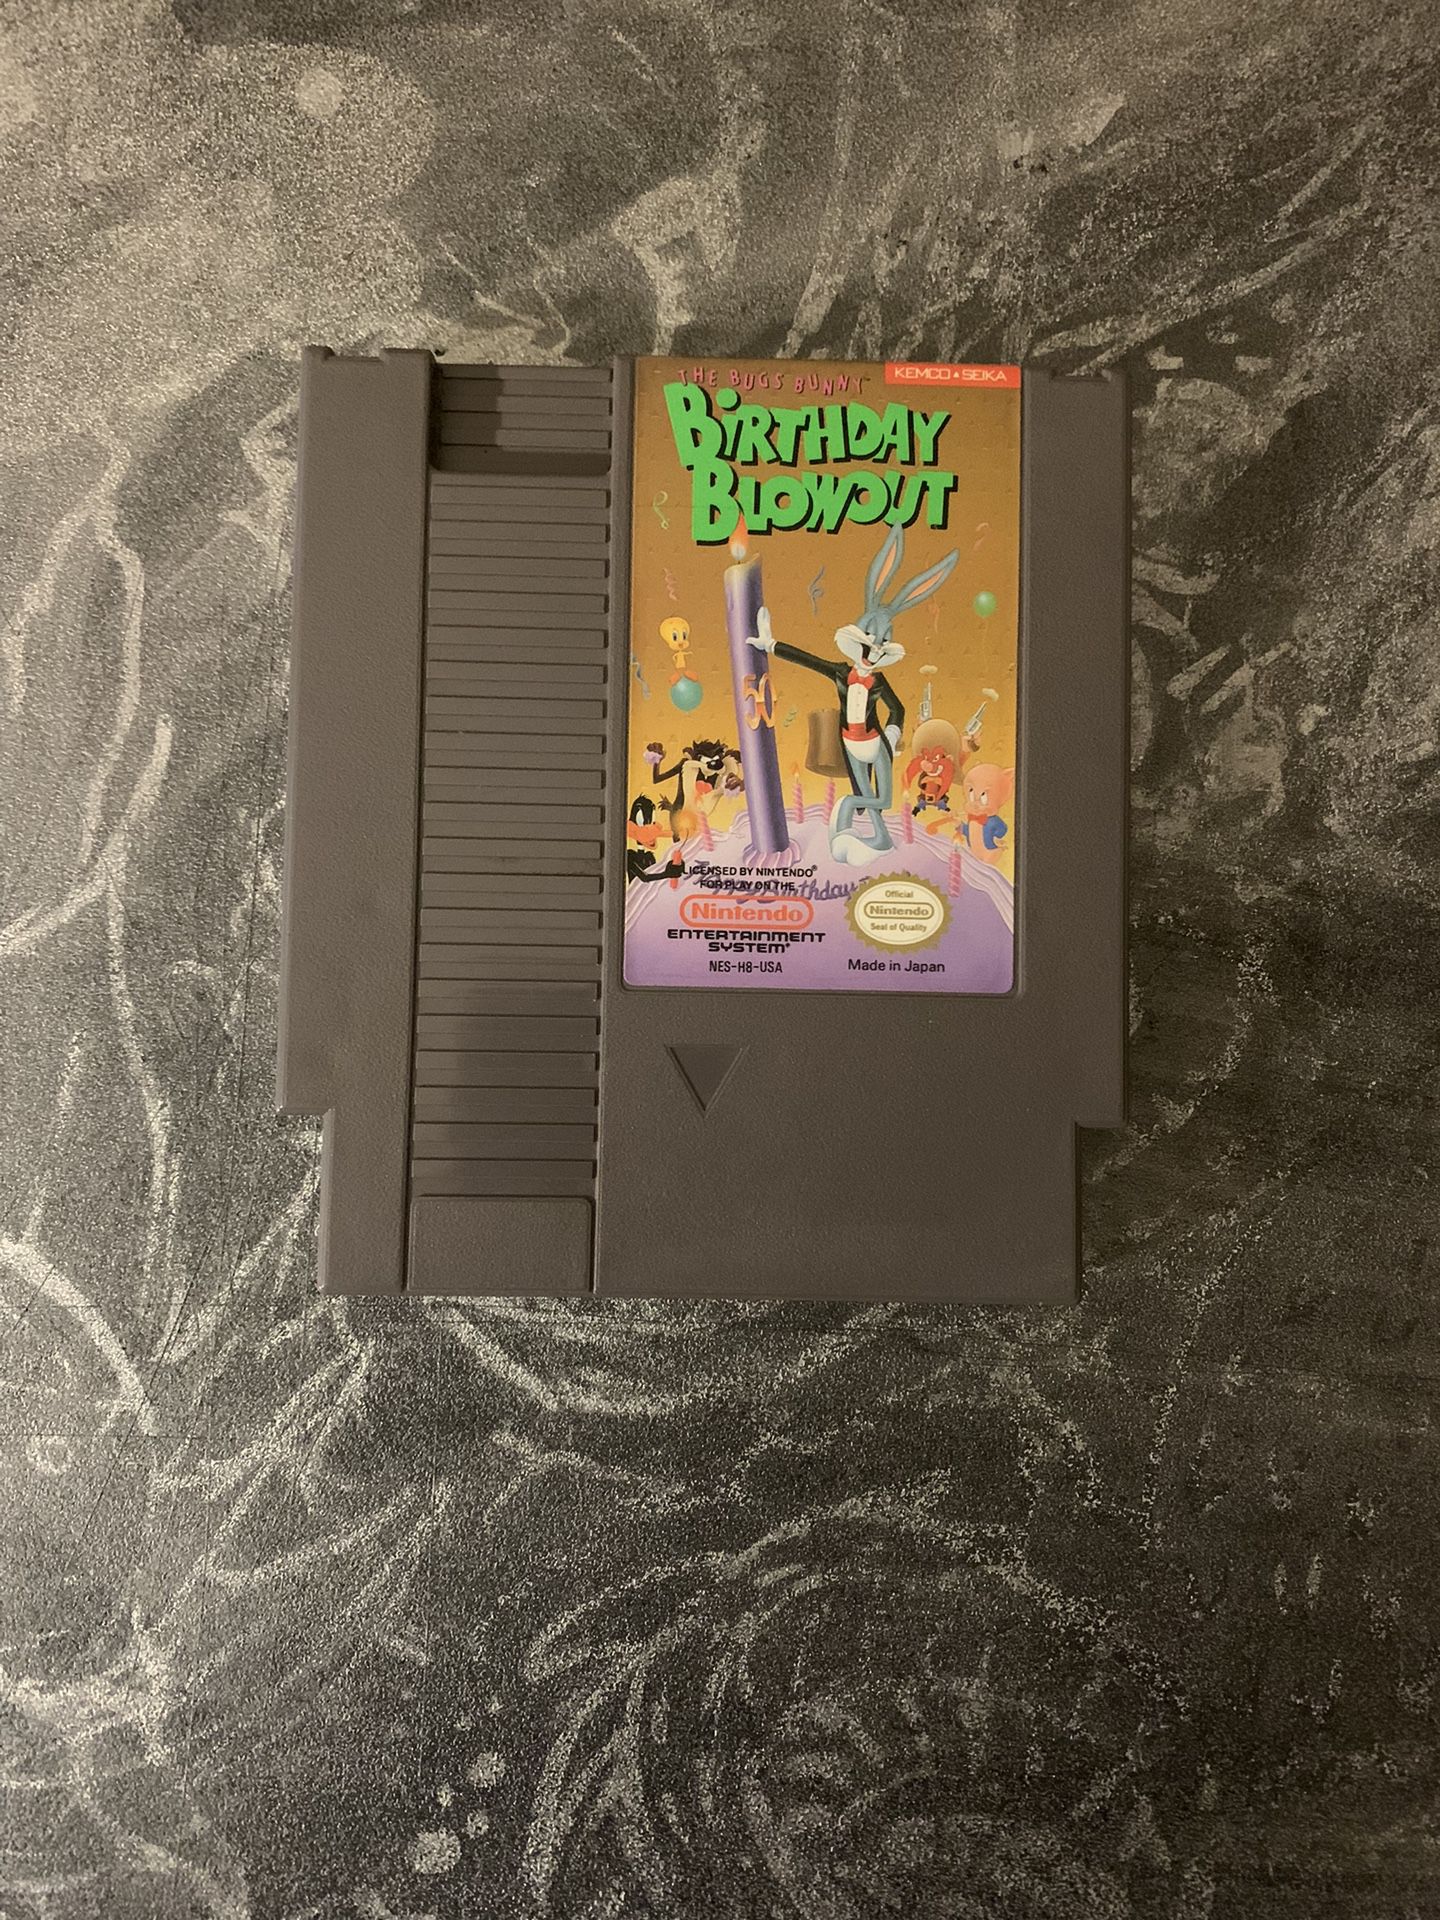 Bugs Bunny Birthday Blowout for Nintendo NES